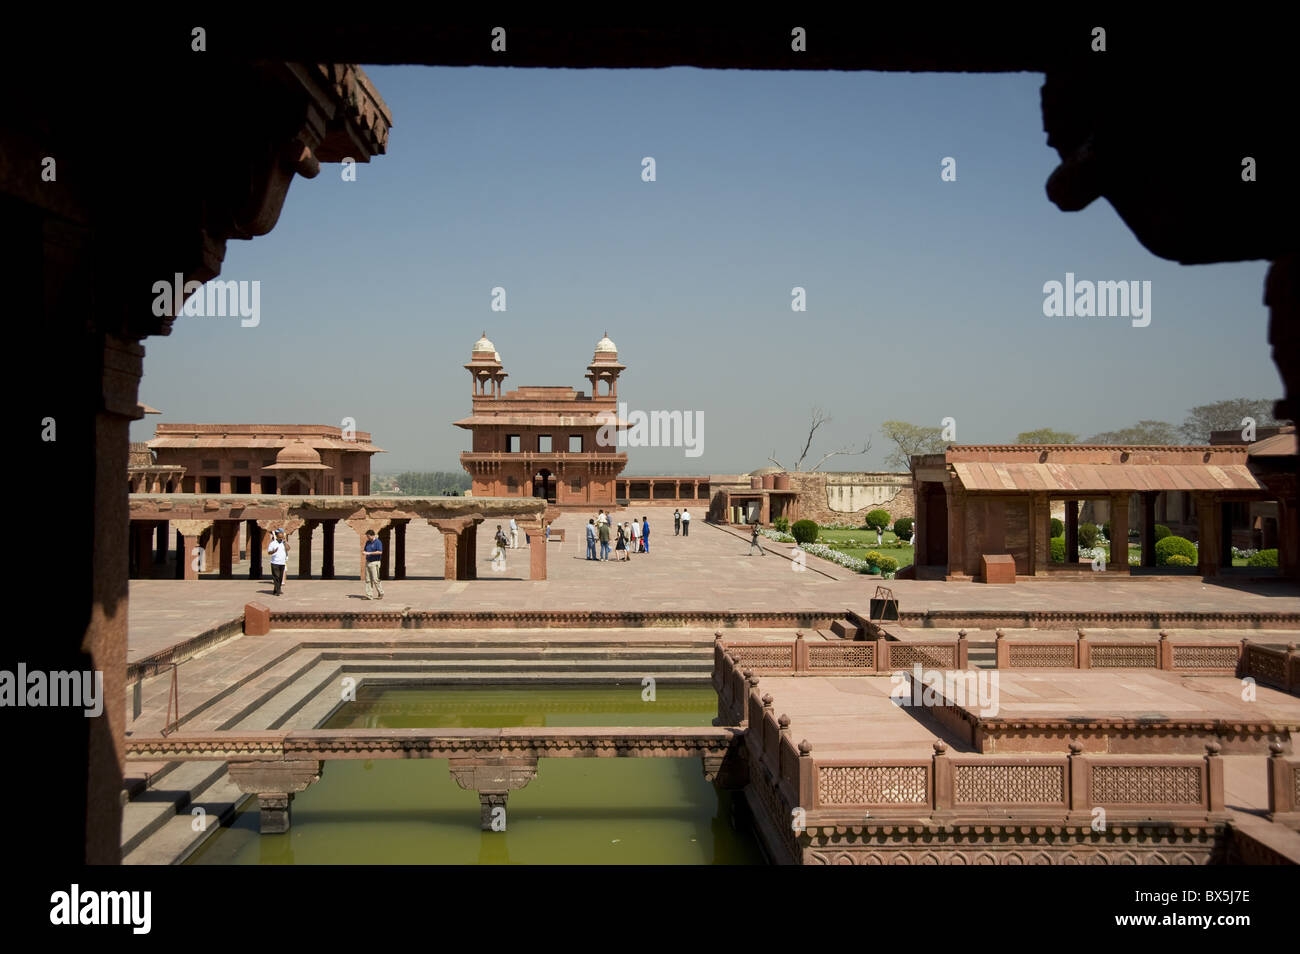 A pool and Diwan-i-Khas, a building in courtyard of the Mughal walled city of Fatehpur Sikri, UNESCO World Heritage Site, India Stock Photo